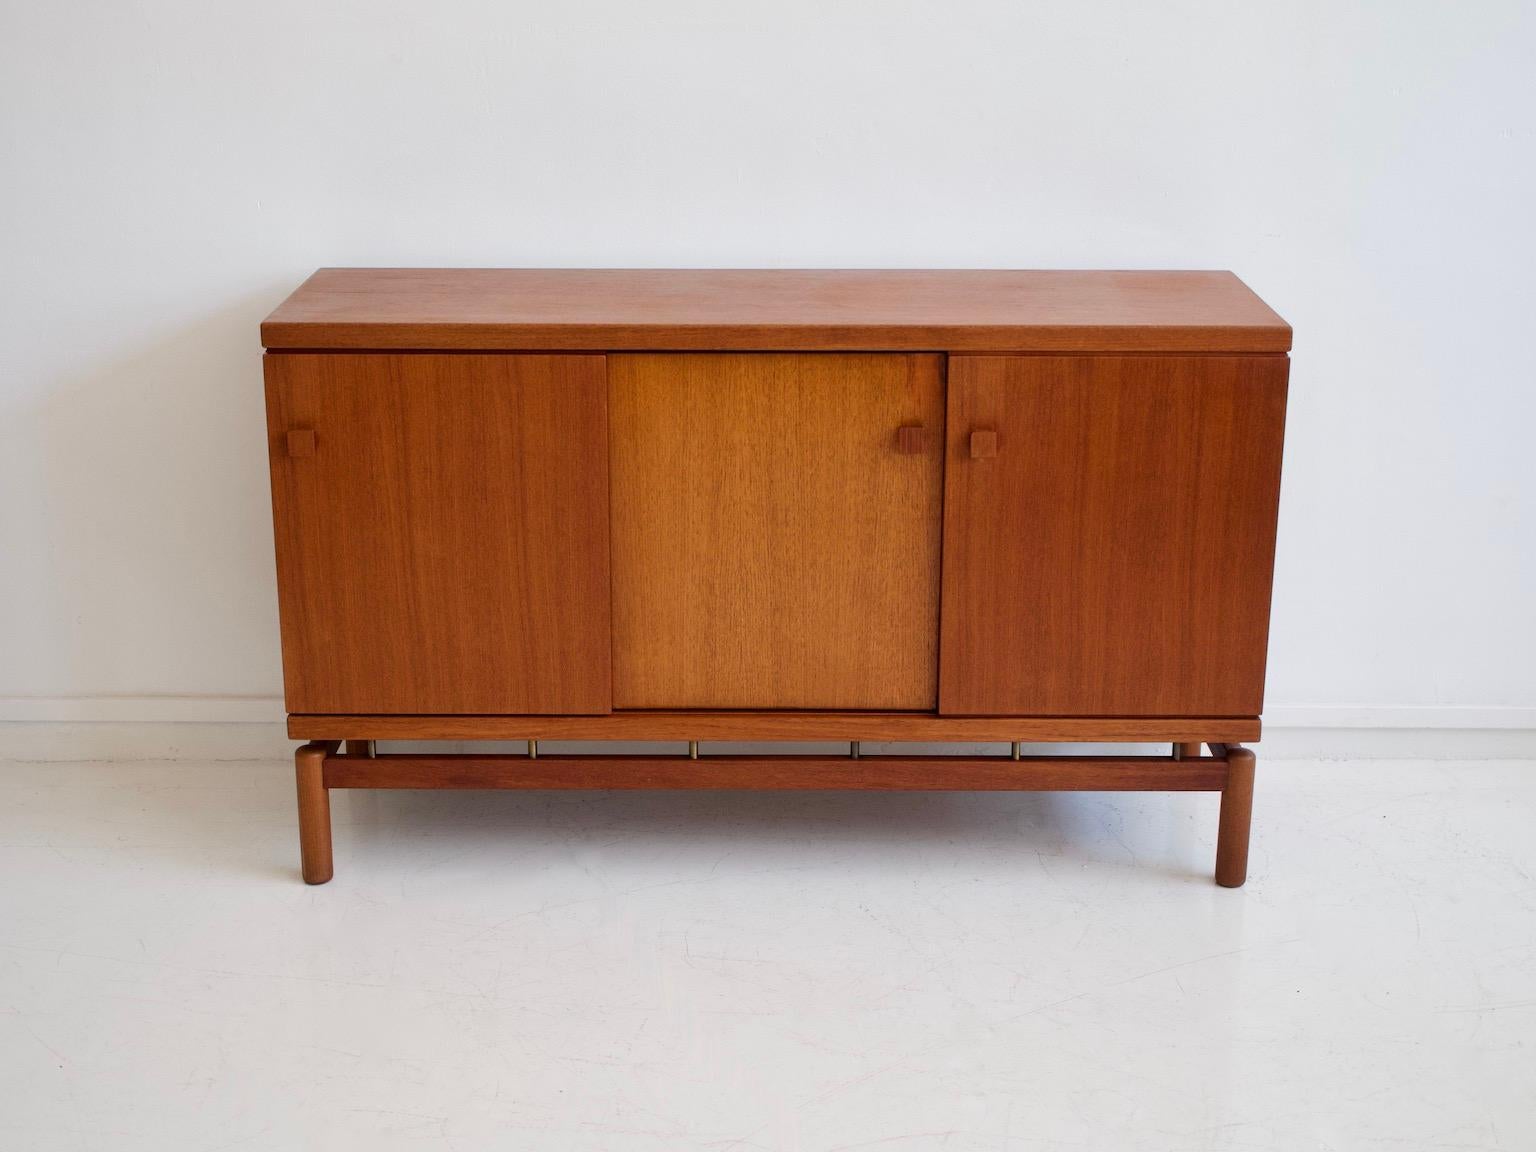 Italian Mid-20th Century Modern Teak Sideboard with Brass Details For Sale